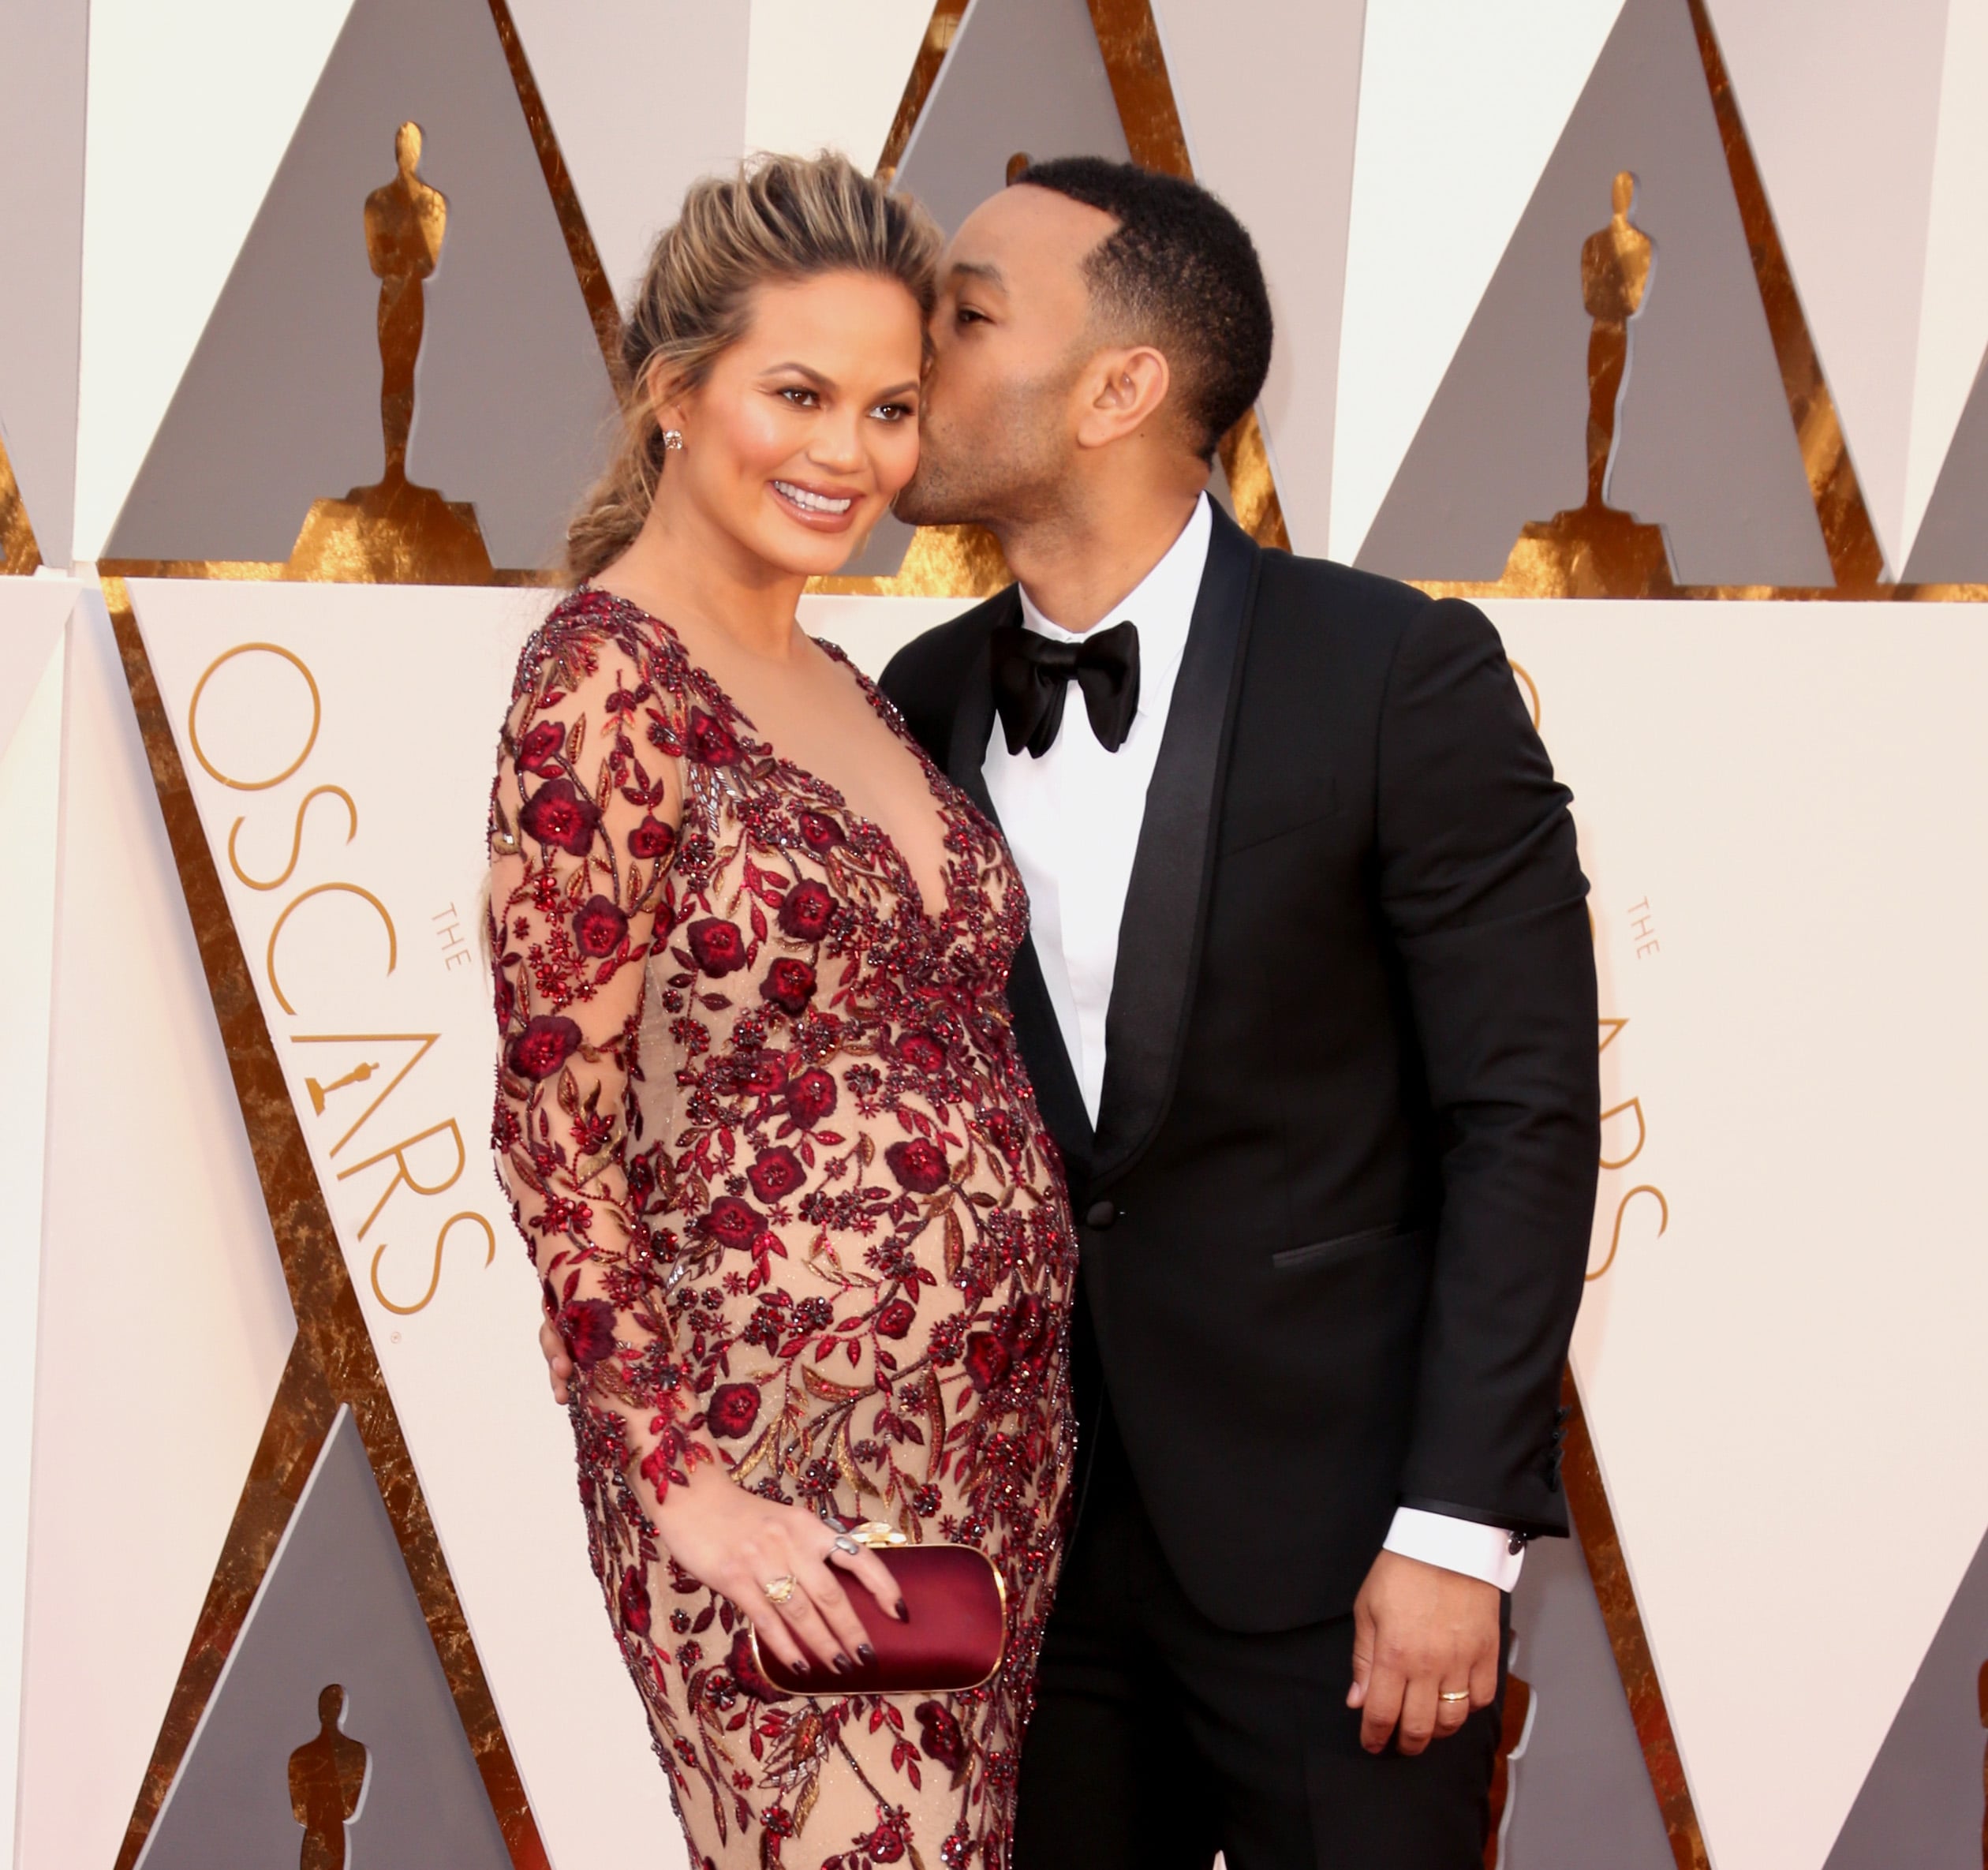 Chrissy Teigen reveals she is pregnant, shows off baby bump - Los Angeles  Times